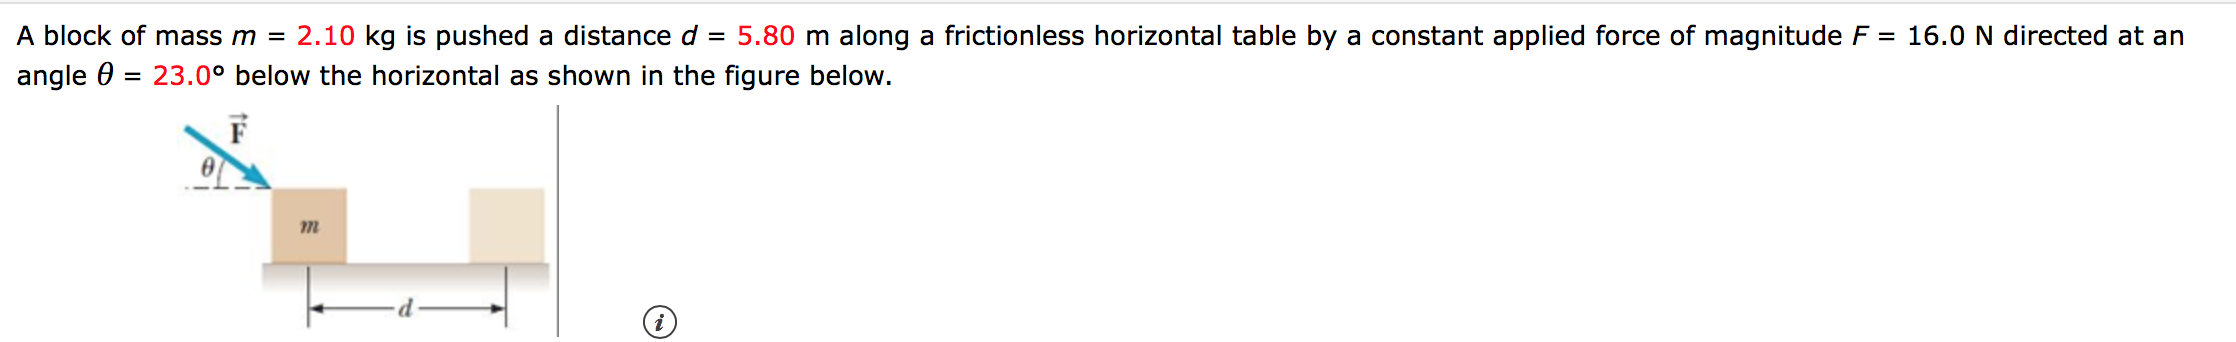 A block of mass m = 2.10 kg is pushed a distanced = 5.80 m along a frictionless horizontal table by a constant applied force of magnitude F = 16.0 N directed at an
23.00 below the horizontal as shown in the figure below.
angle 0
m
